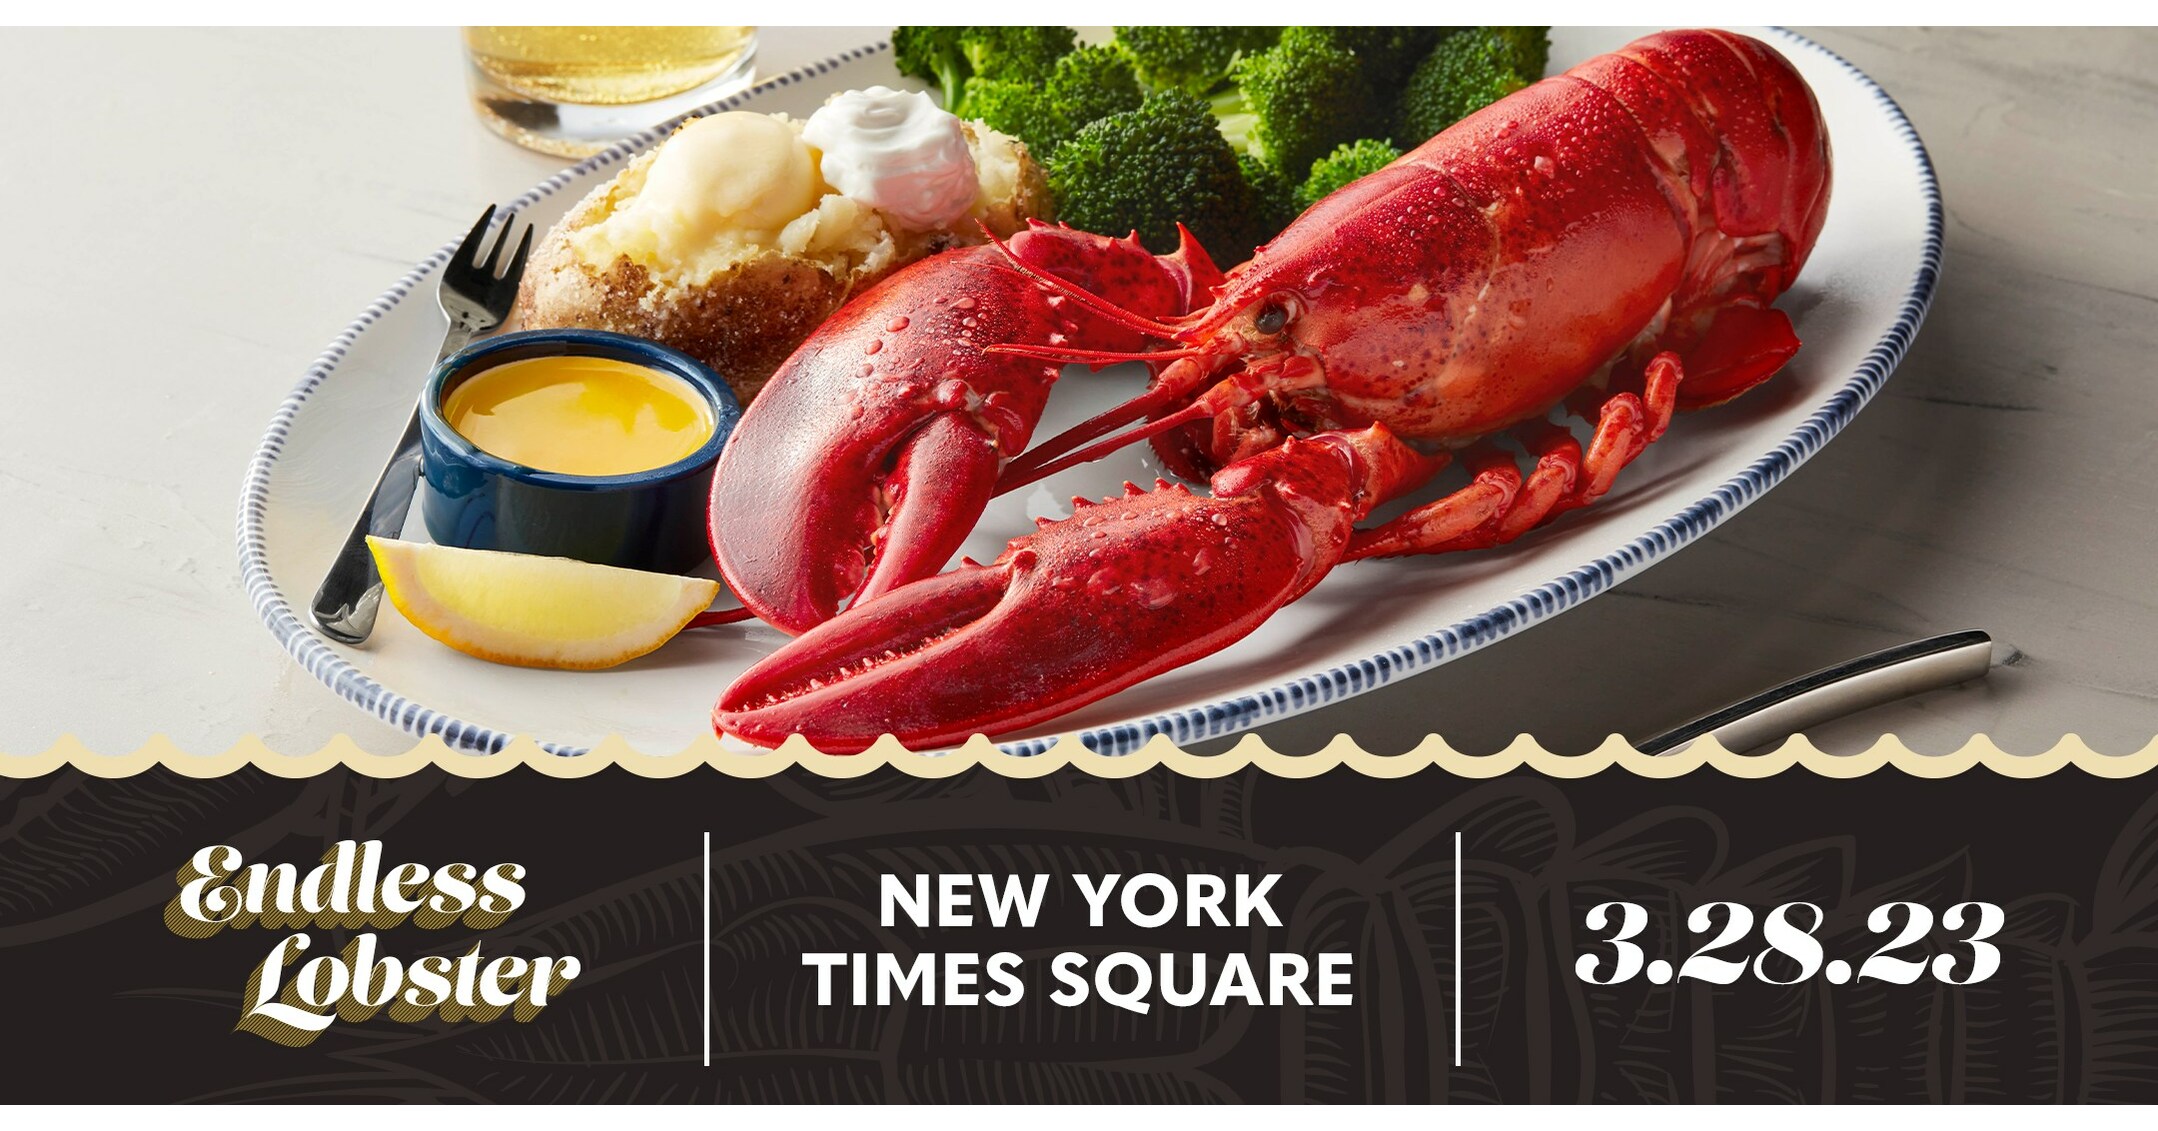 Red Lobster® Announces First-Ever Endless Lobster